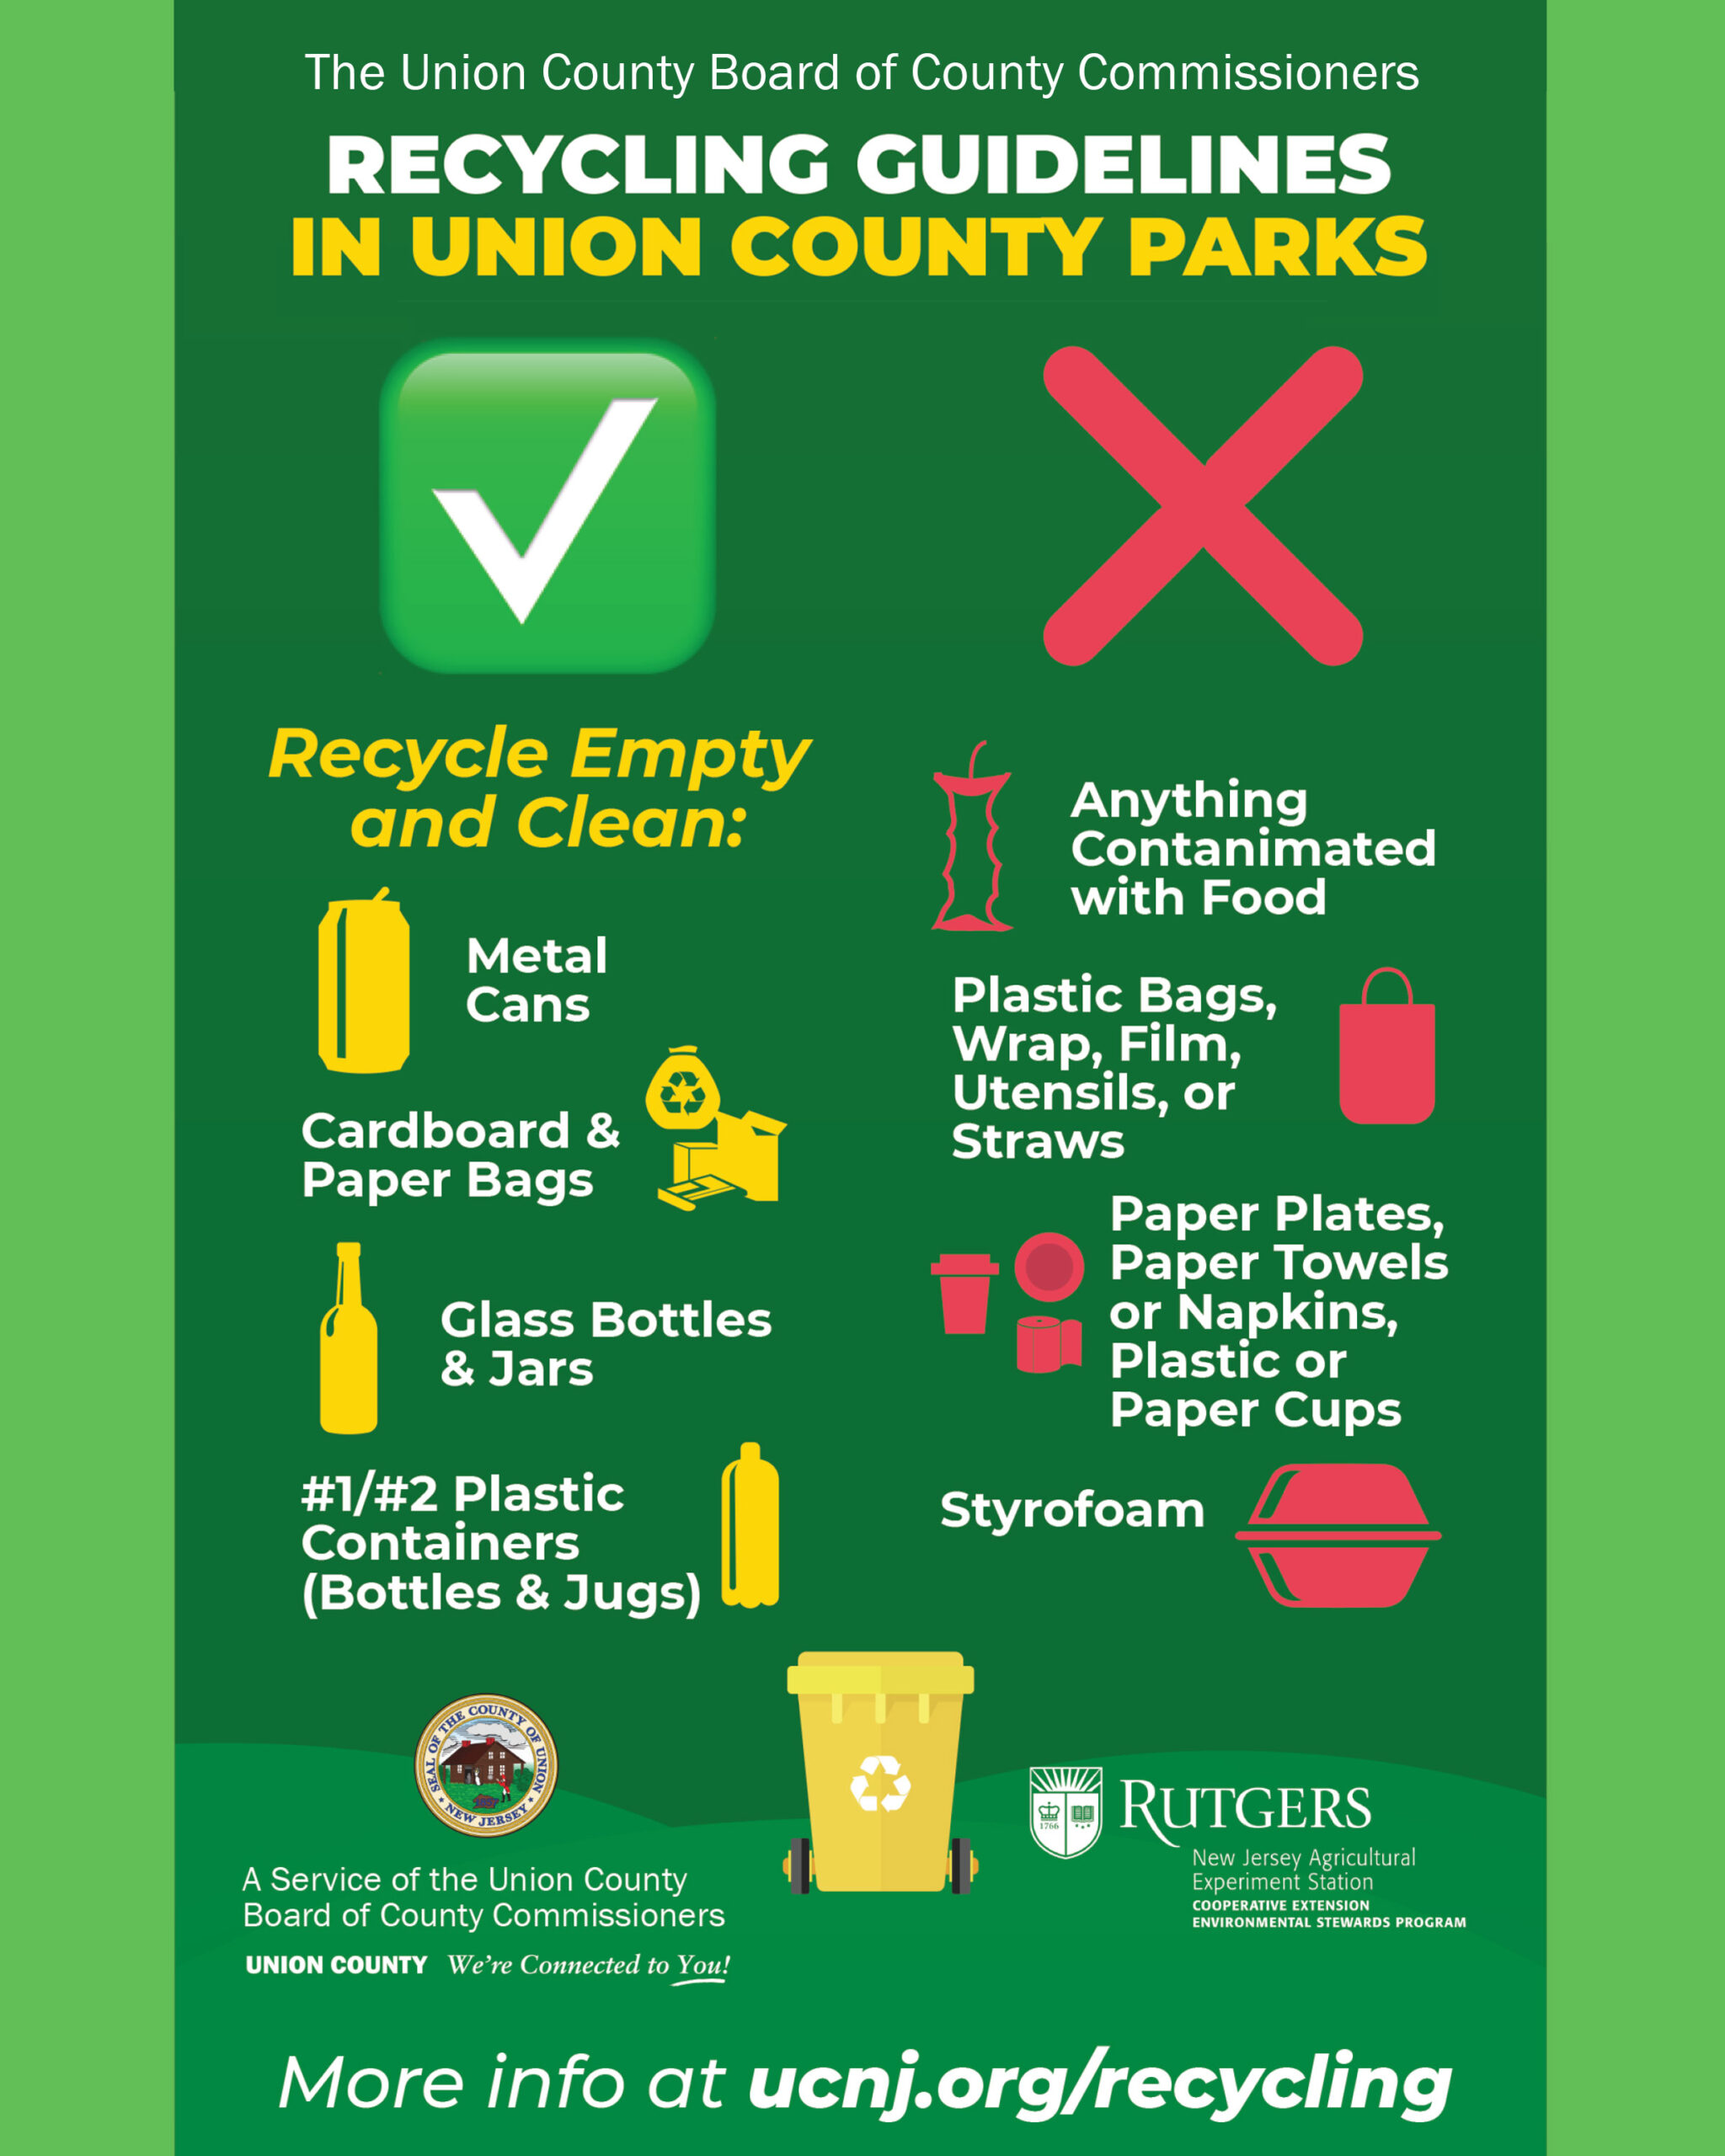 Union County to Unveil New Recycling & Litter Control Pilot in Warinanco Park